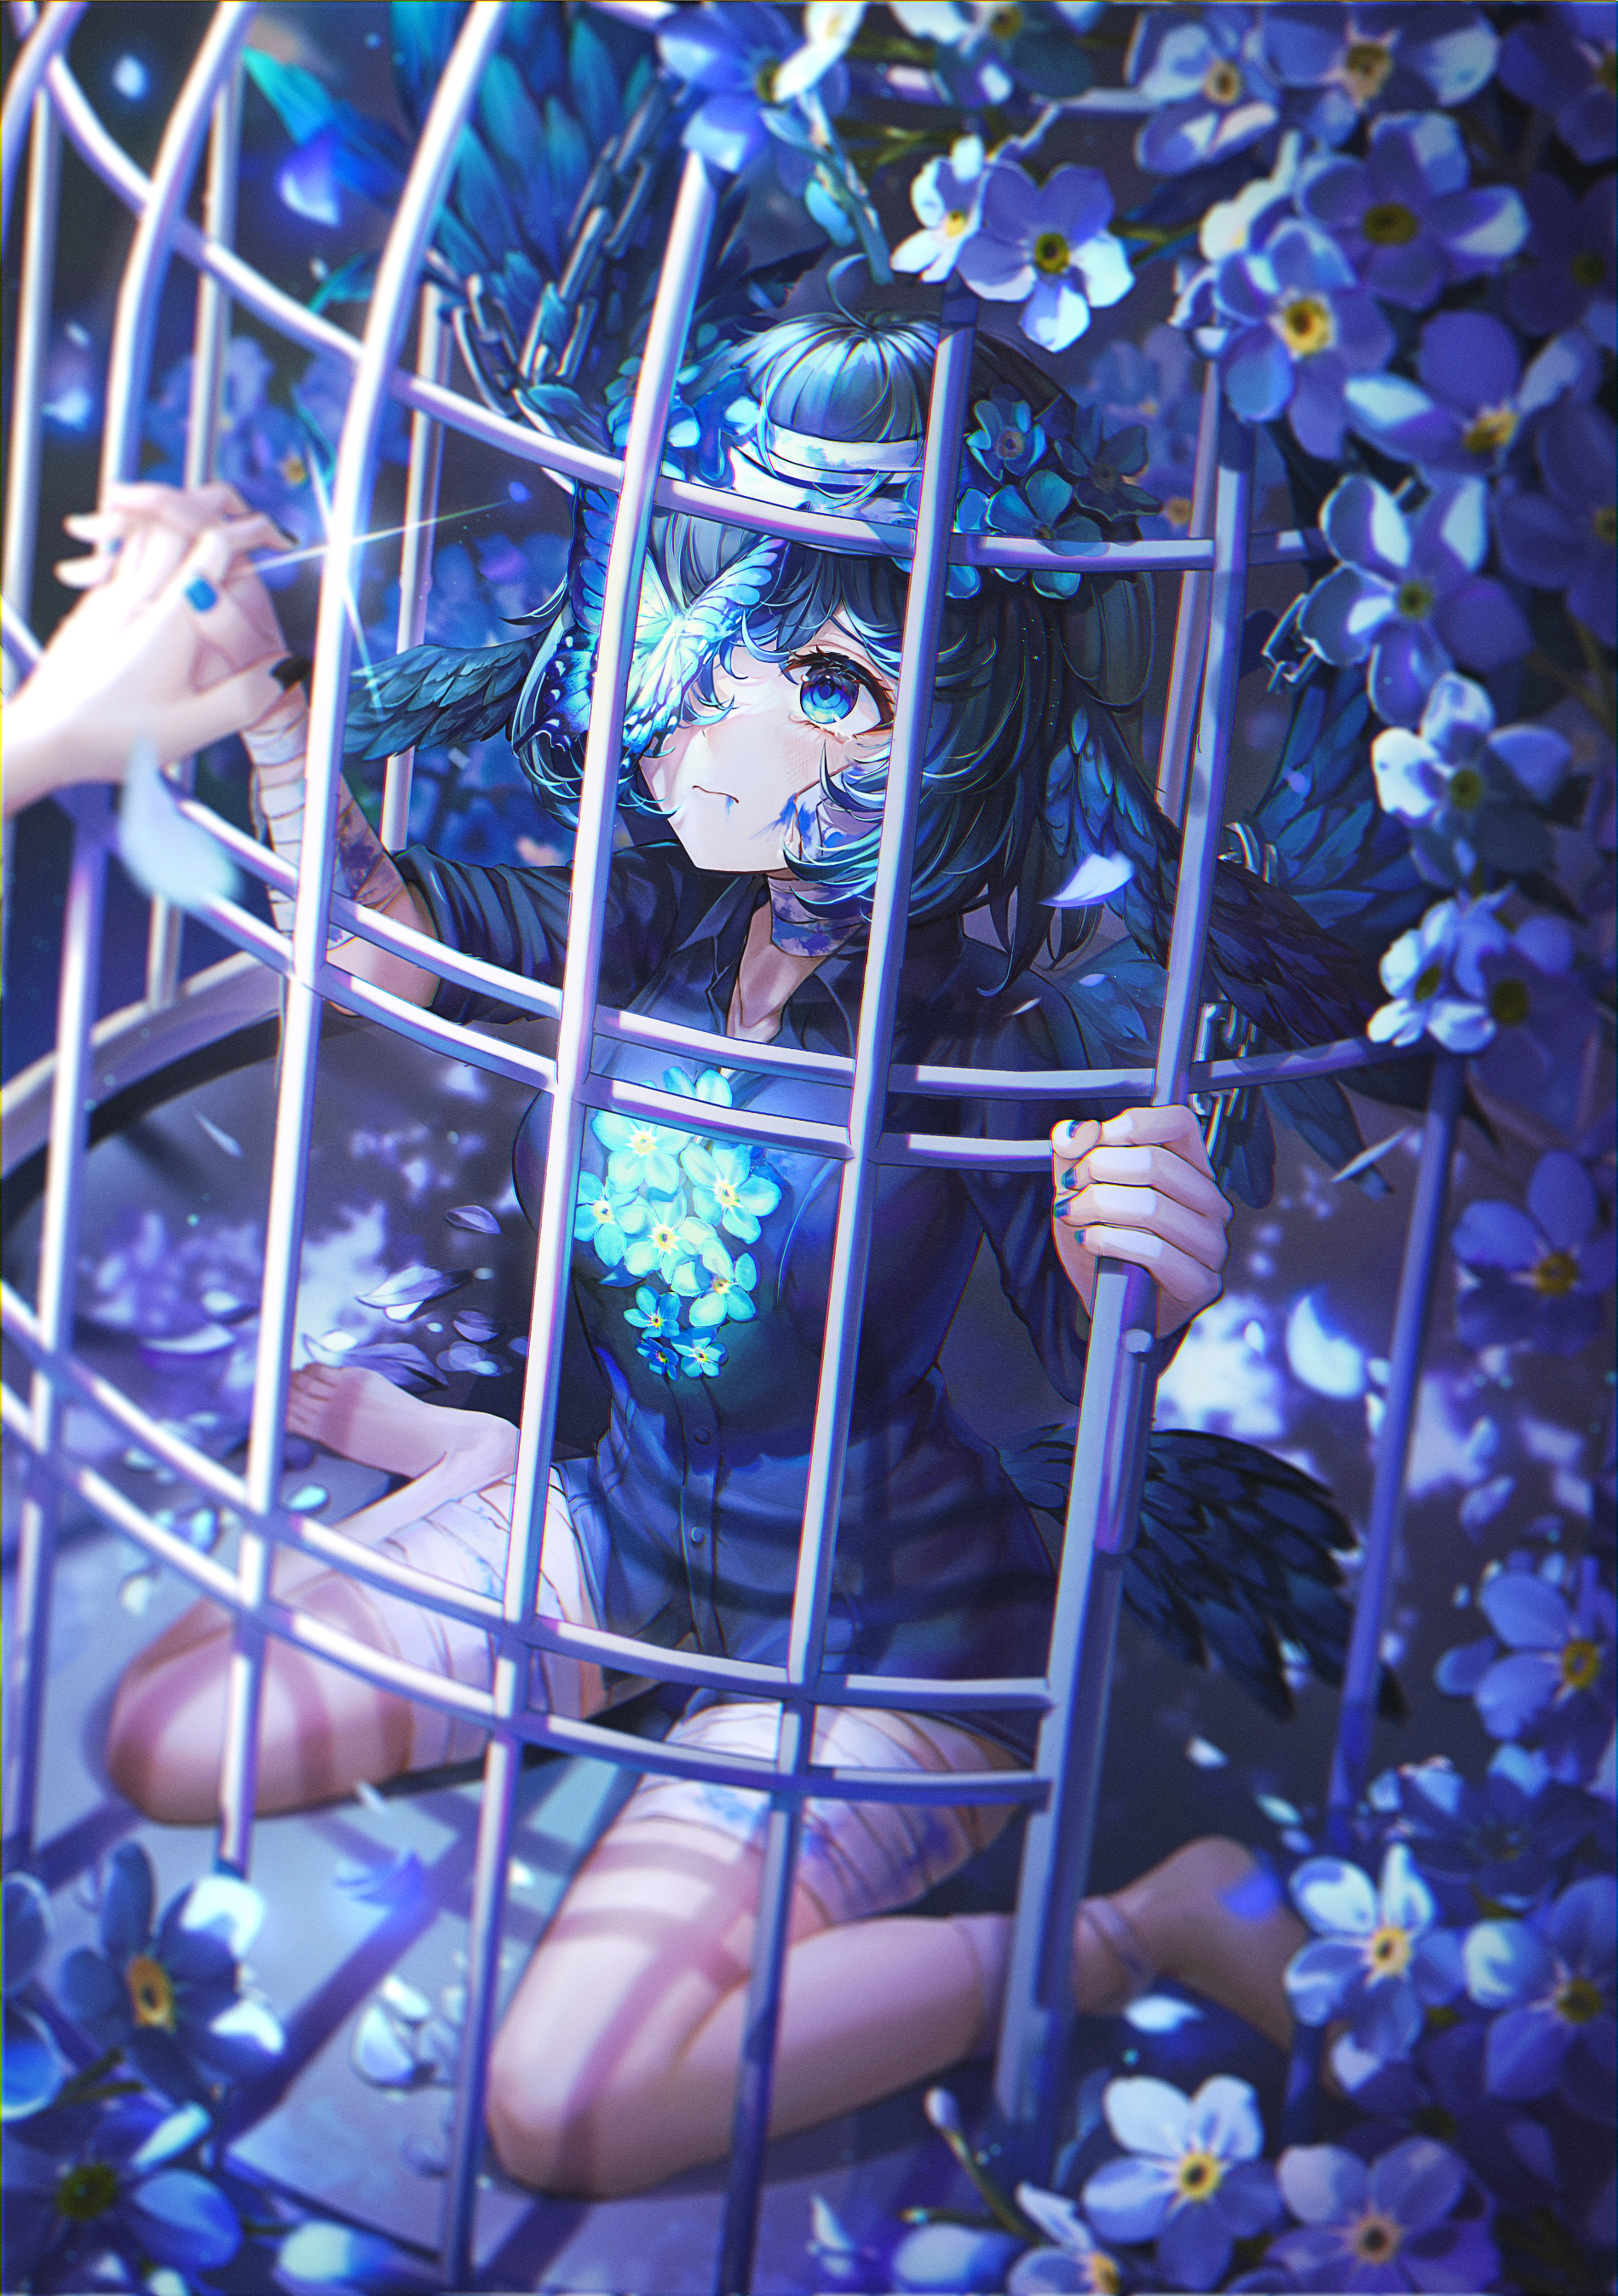 Anime 1899x2694 anime anime girls Final Fantasy XIV: A Realm Reborn Metion bandaged arm flowers Pixiv cages holding hands painted nails blue nails black nails plants blue eyes